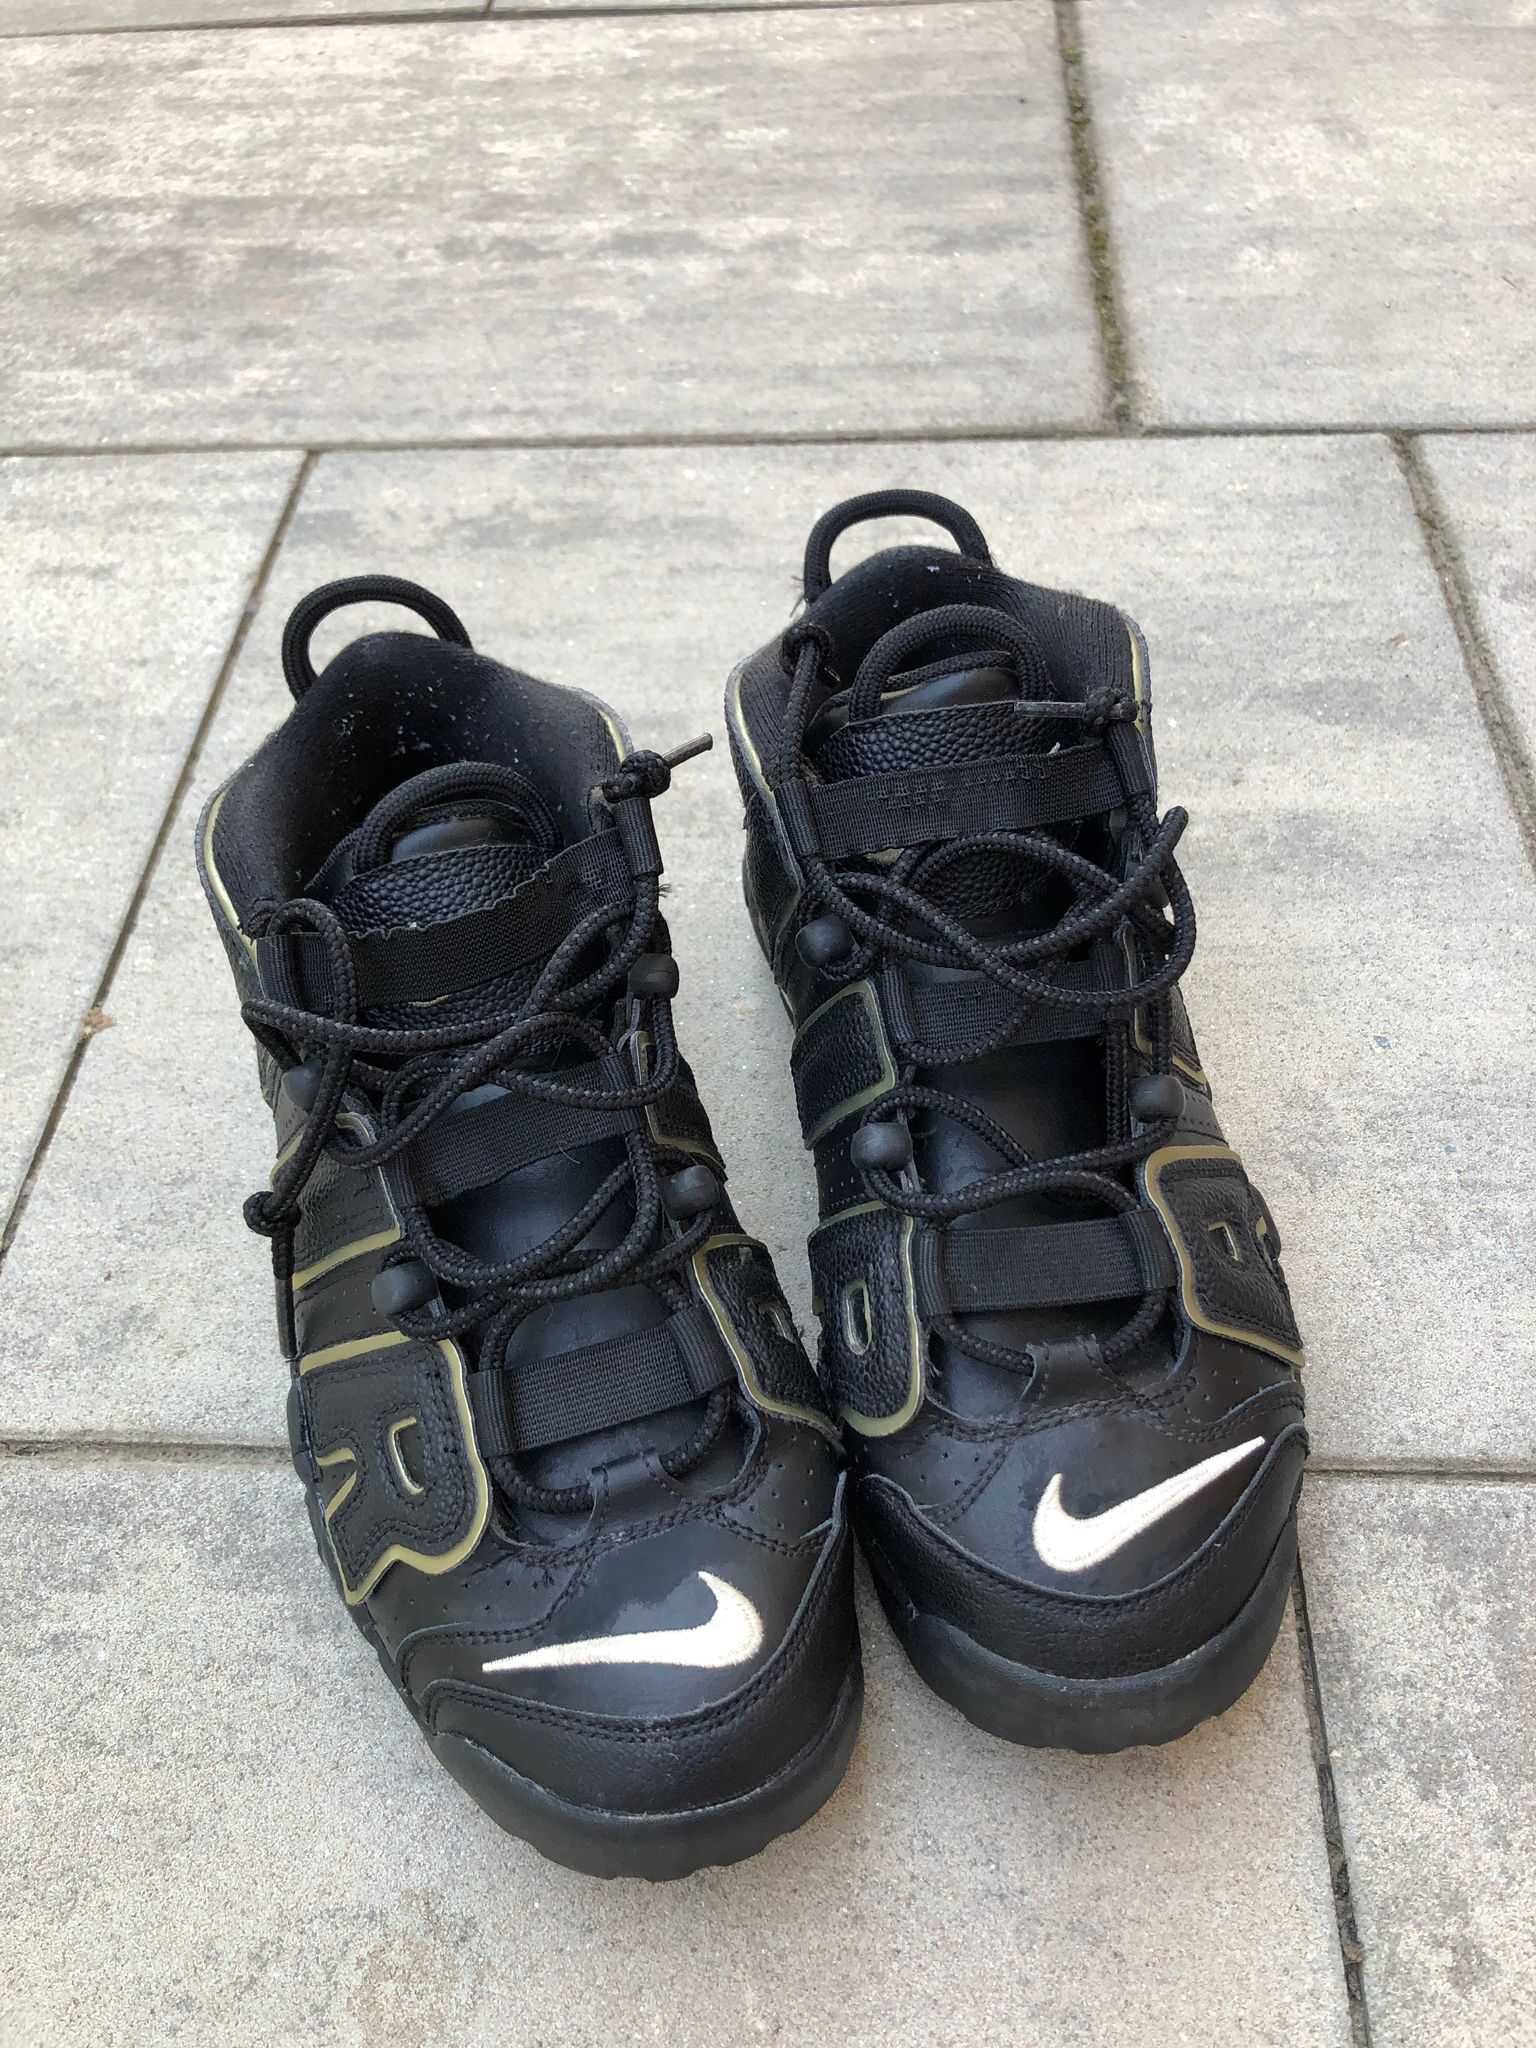 Sneakers Air More Uptempo black and metallic gold-tone leather